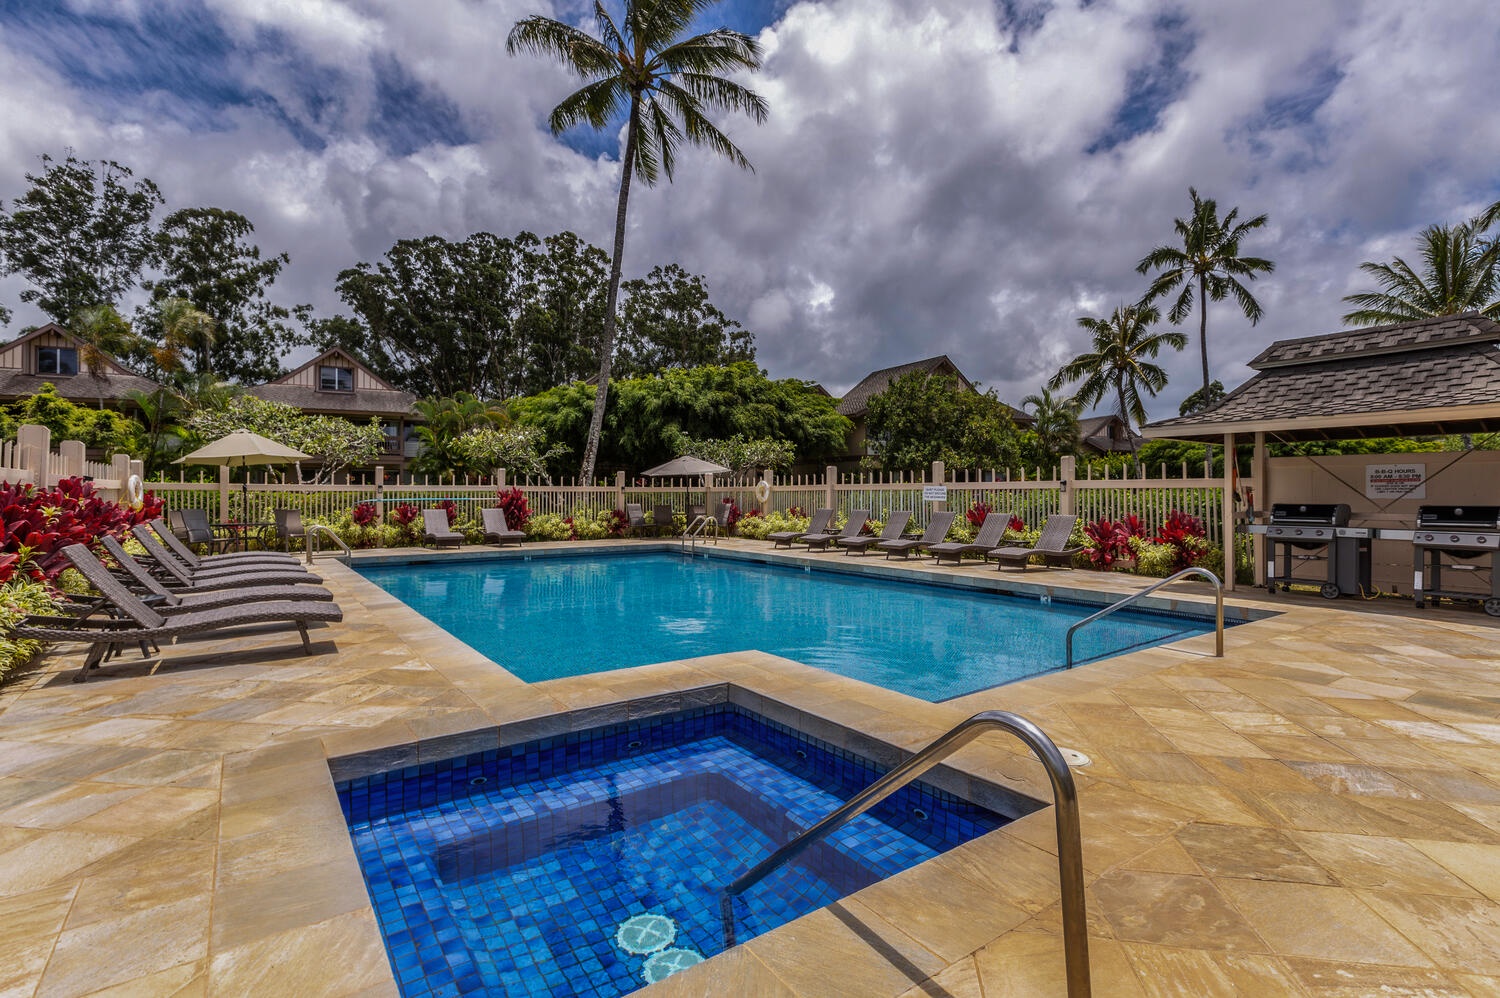 Princeville Vacation Rentals, Hideaway Haven Suite - Take a refreshing dip in the pool under the radiant Hawaiian sun—a true tropical delight.